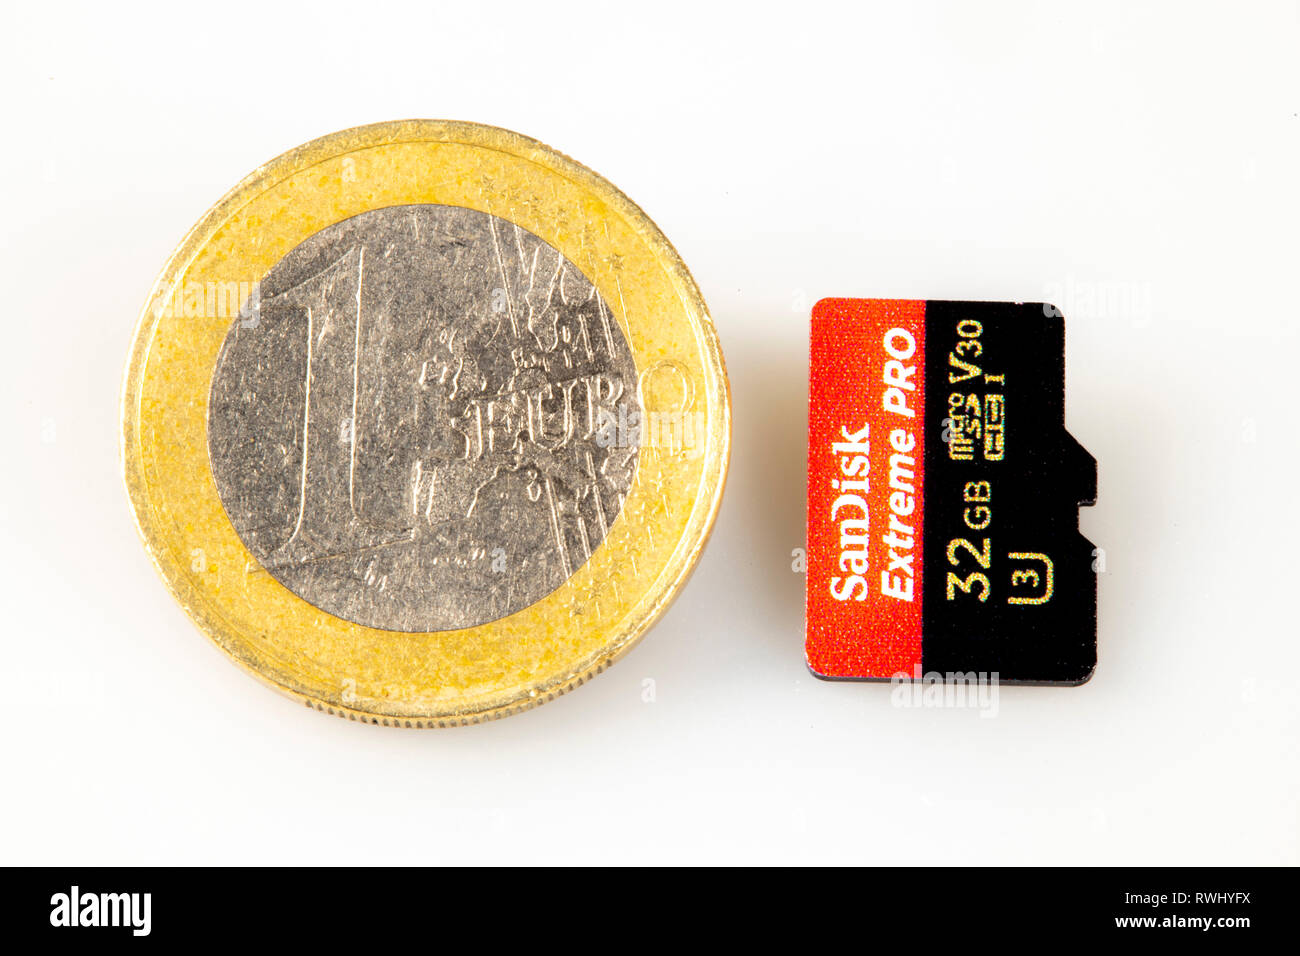 Memory cards, for digital cameras, Micro SD Card, size comparison coin  Stock Photo - Alamy